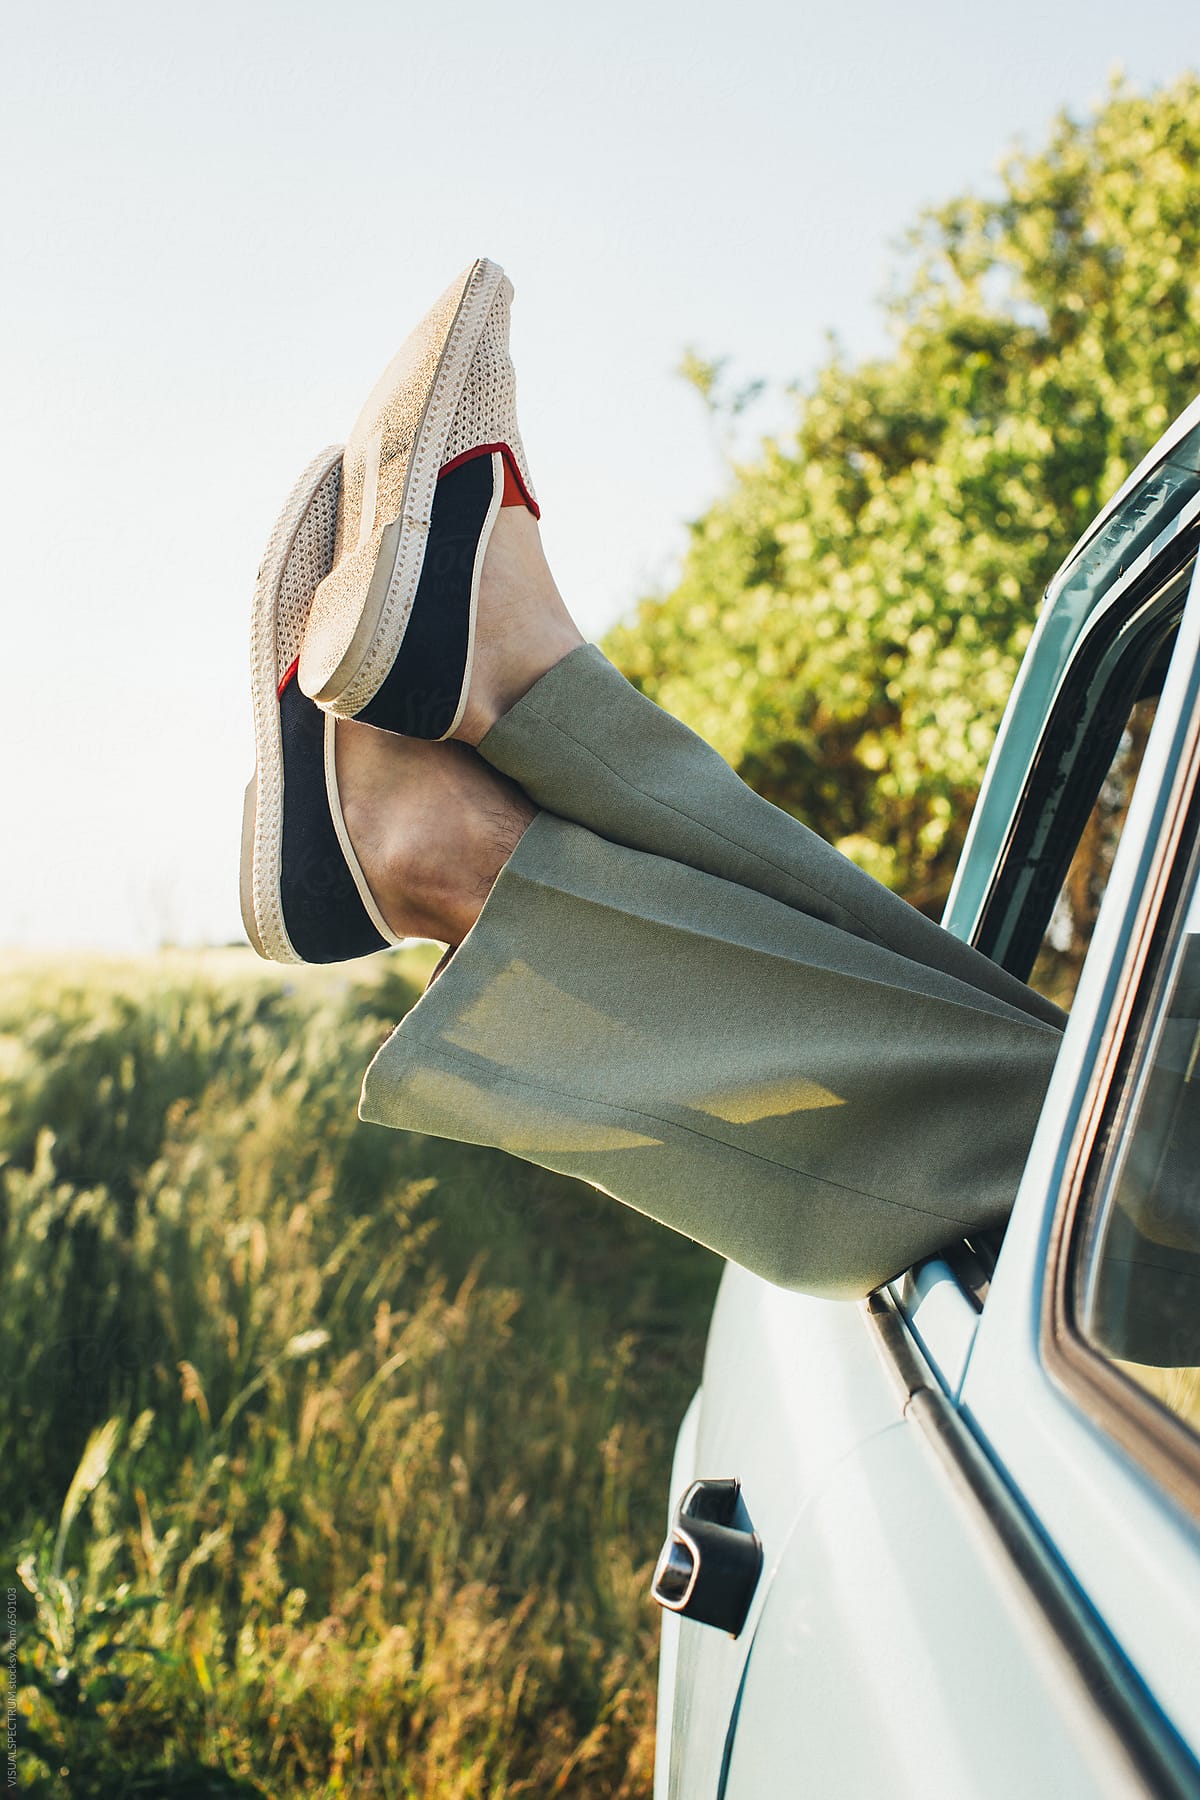 Feet out car window Images - Search Images on Everypixel